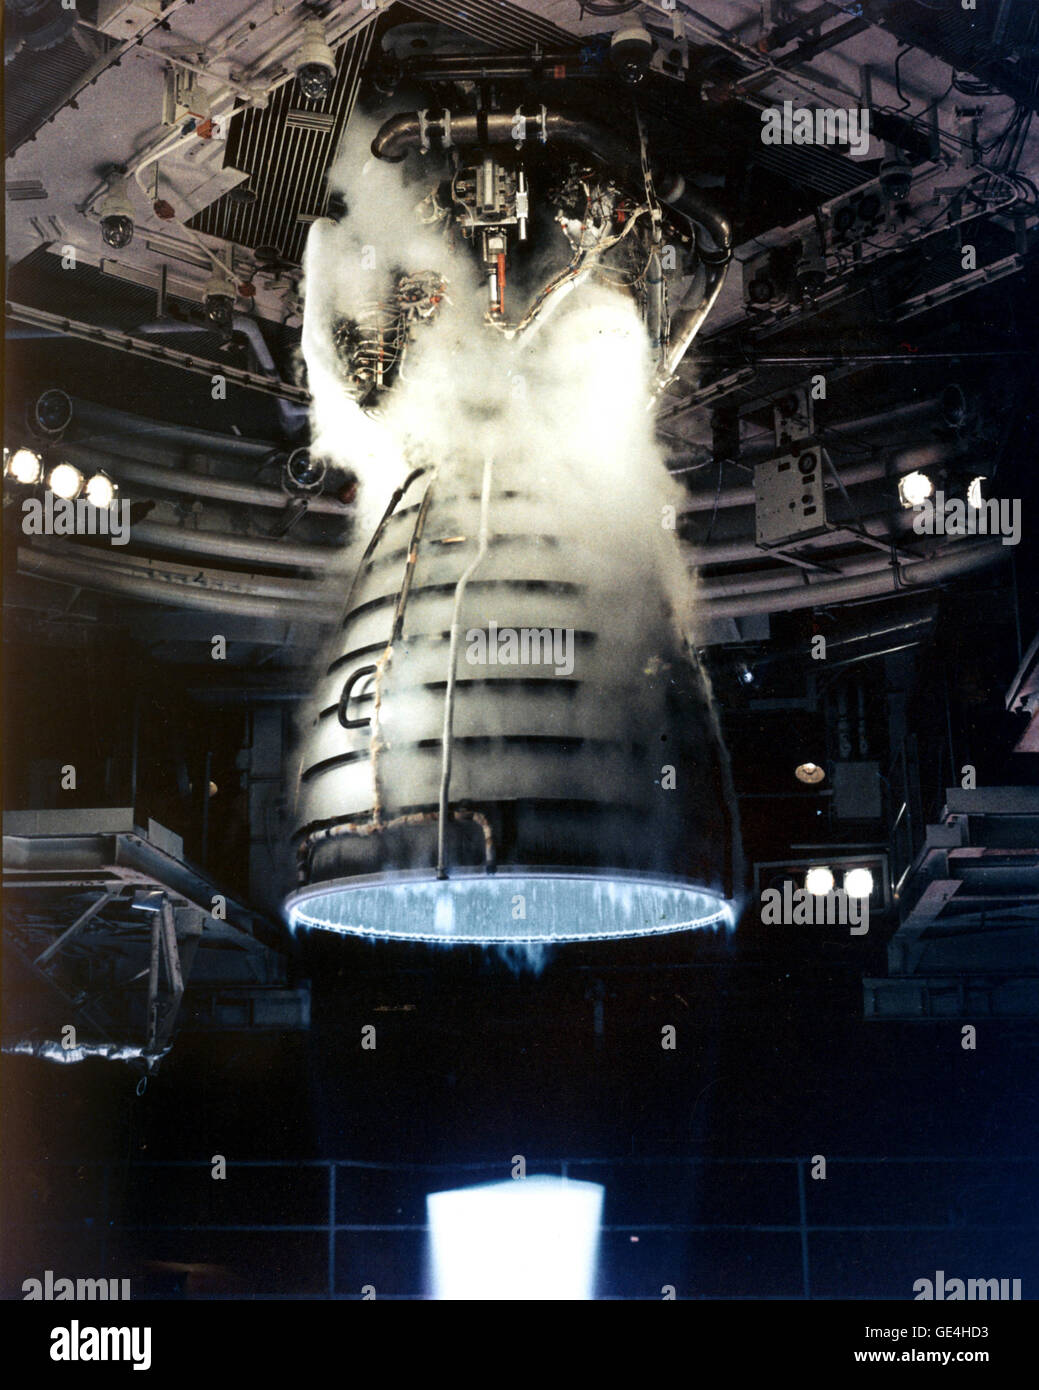 (1981) A remote camera captures a close-up view of a Space Shuttle Main Engine during a test firing at the John C. Stennis Space Center in Hancock County, Mississippi Stock Photo